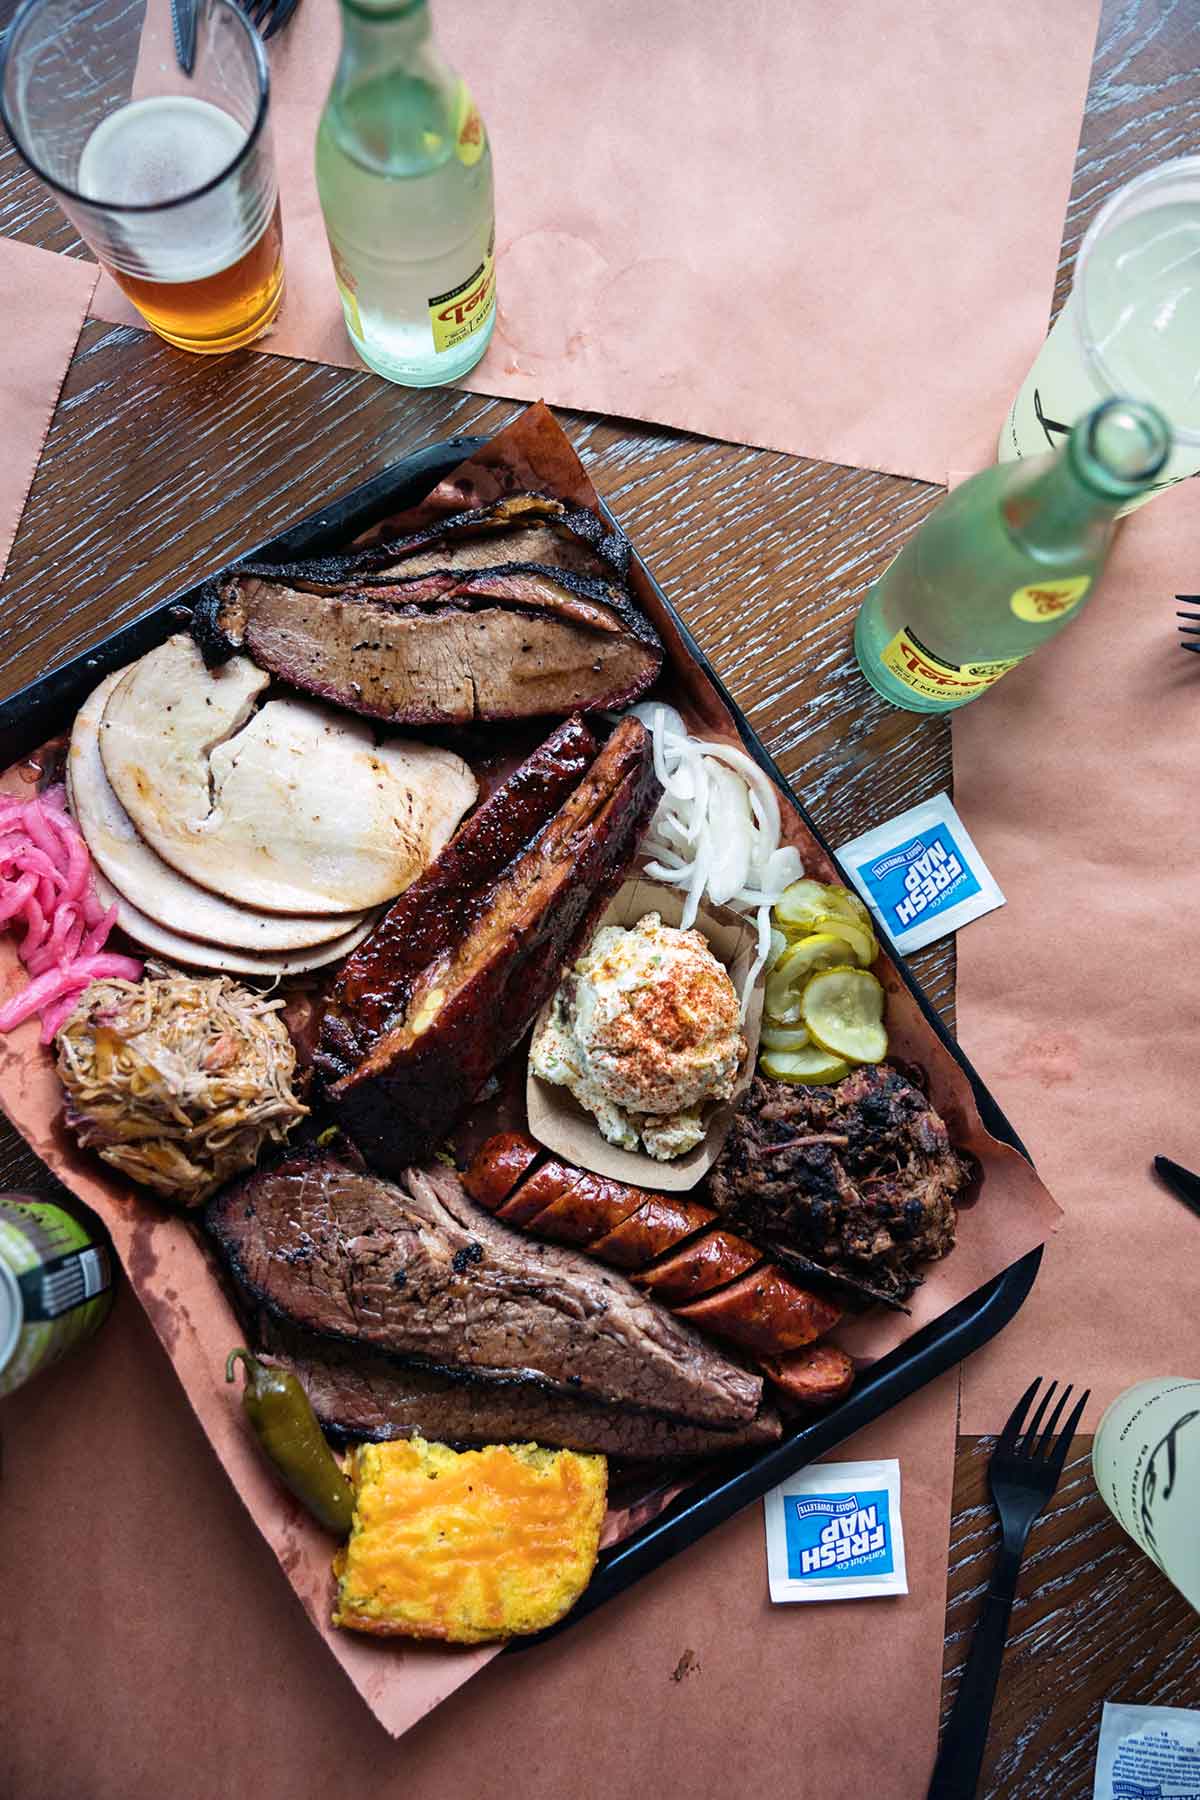 Overhead view of a tray on a wood table filled with meats and sides with drinks surrounding.